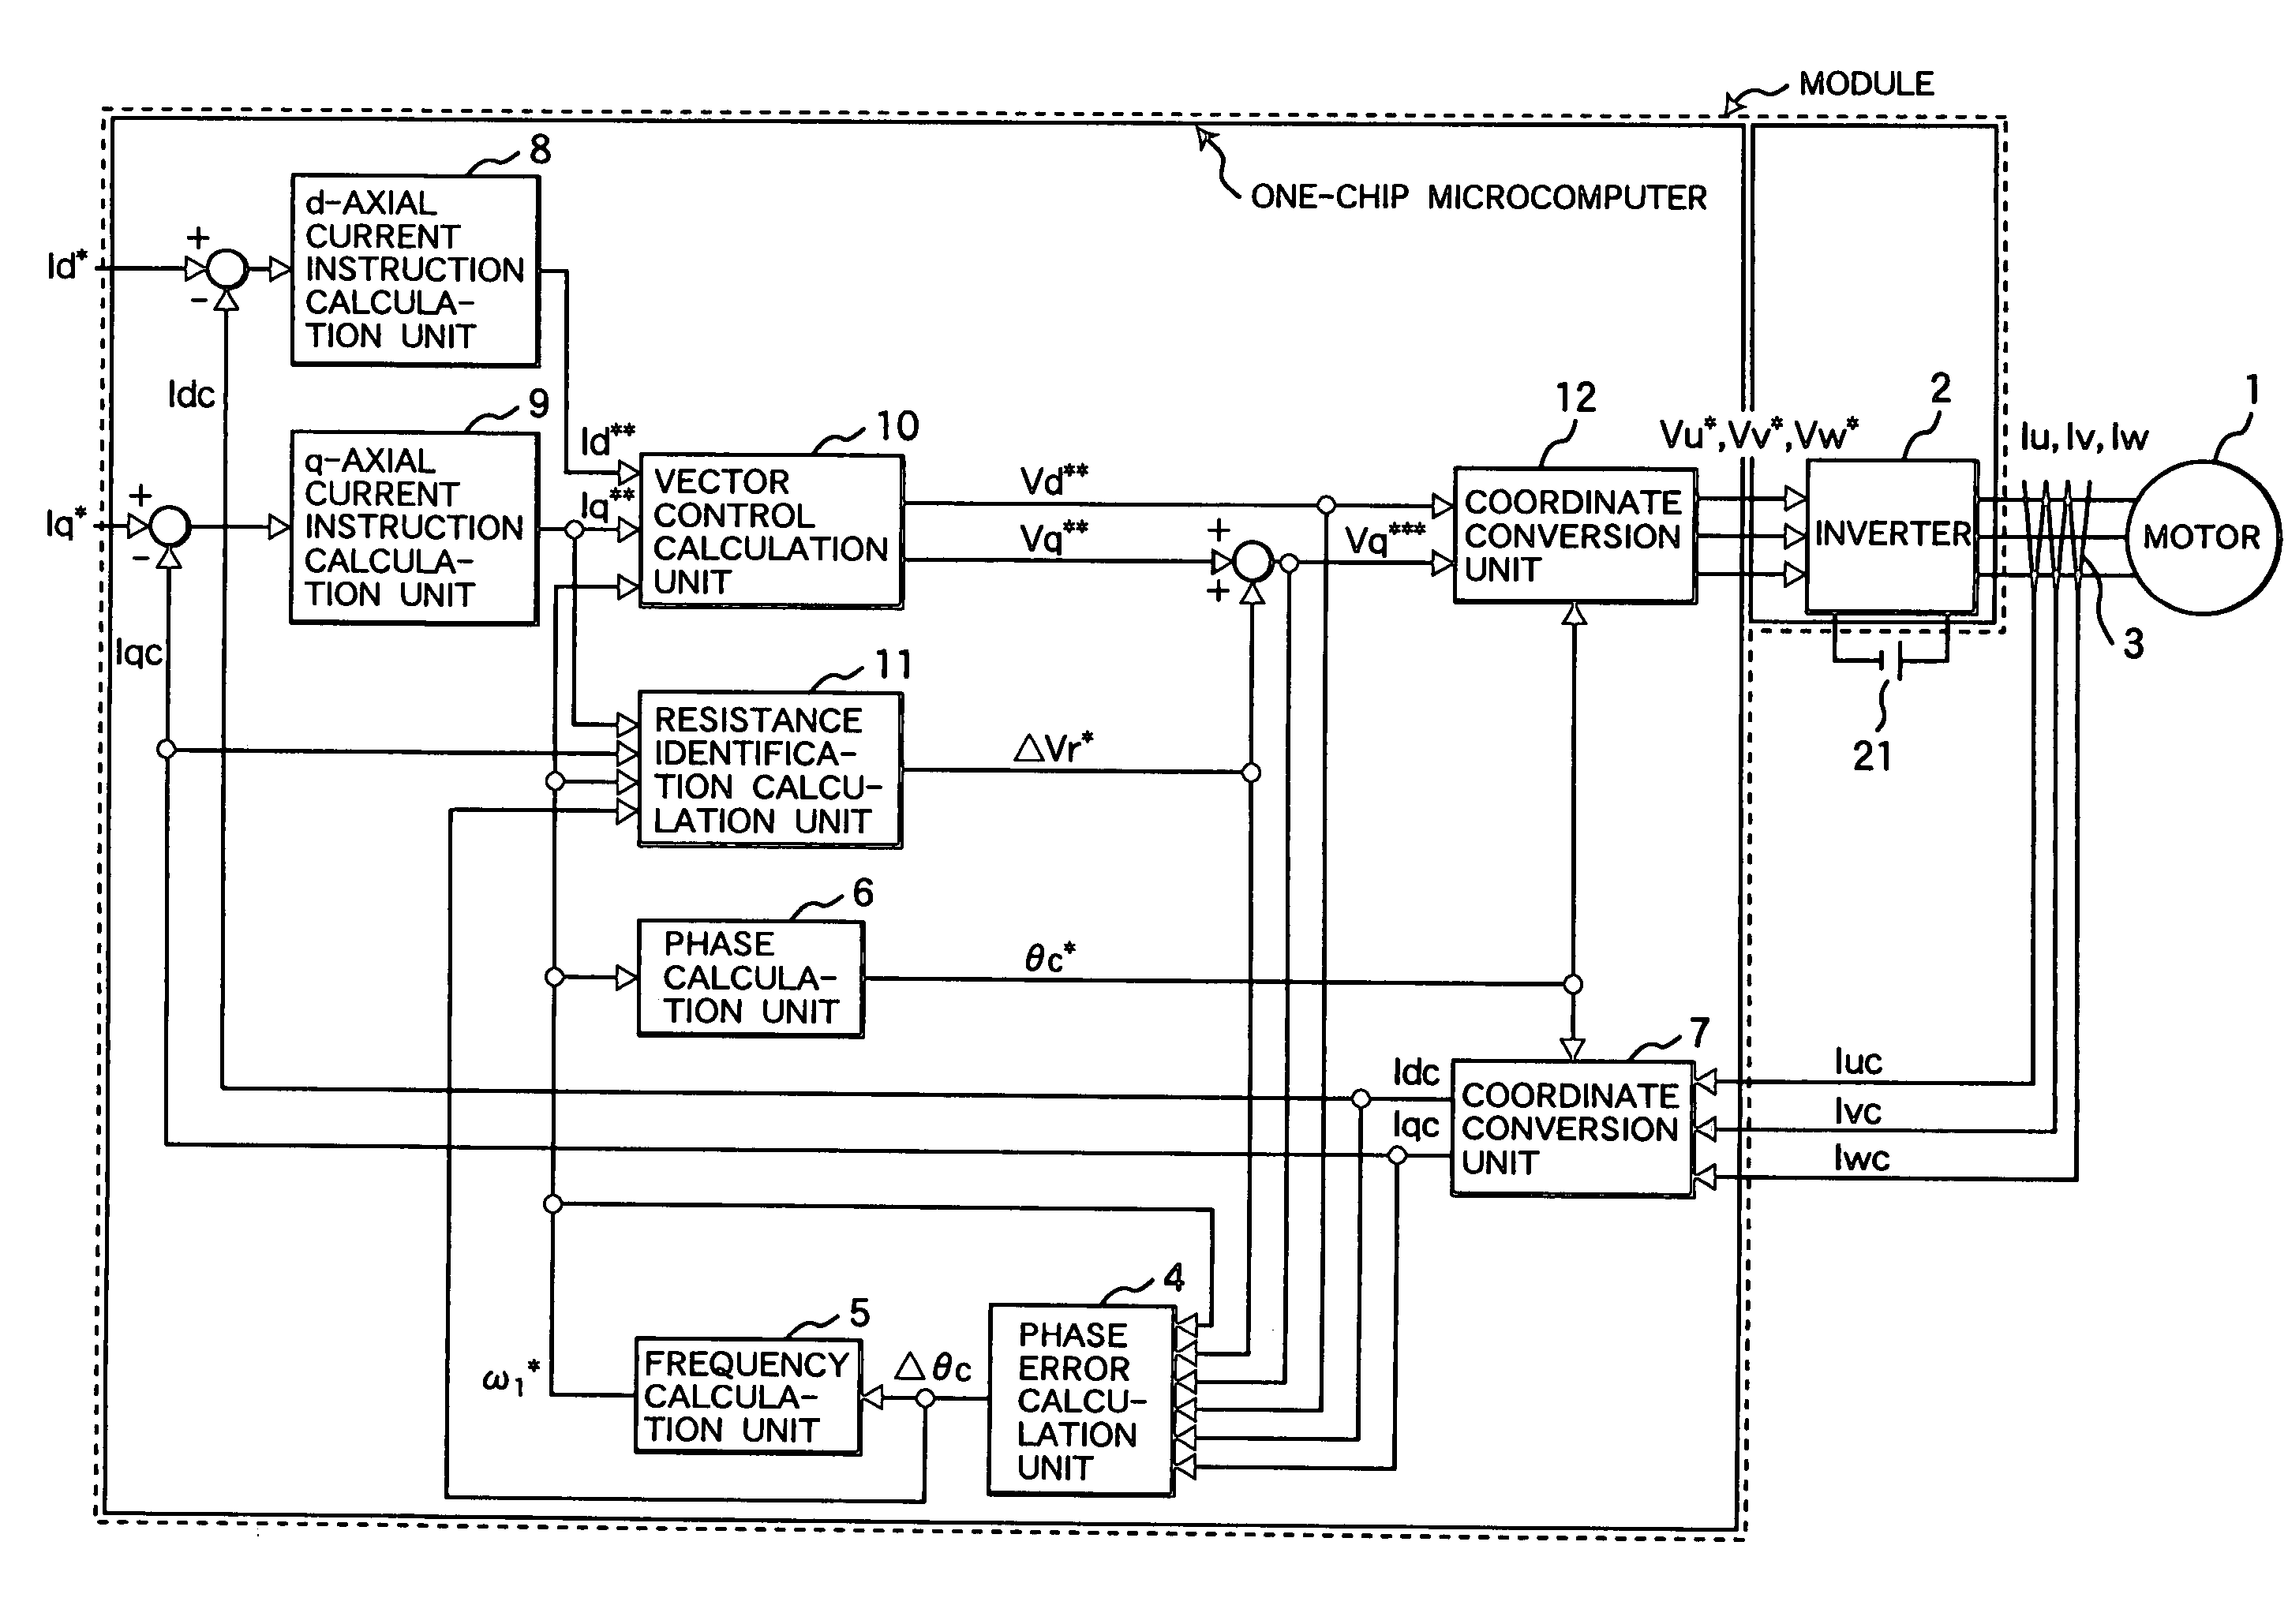 Control system for permanent magnet synchronous motor and module